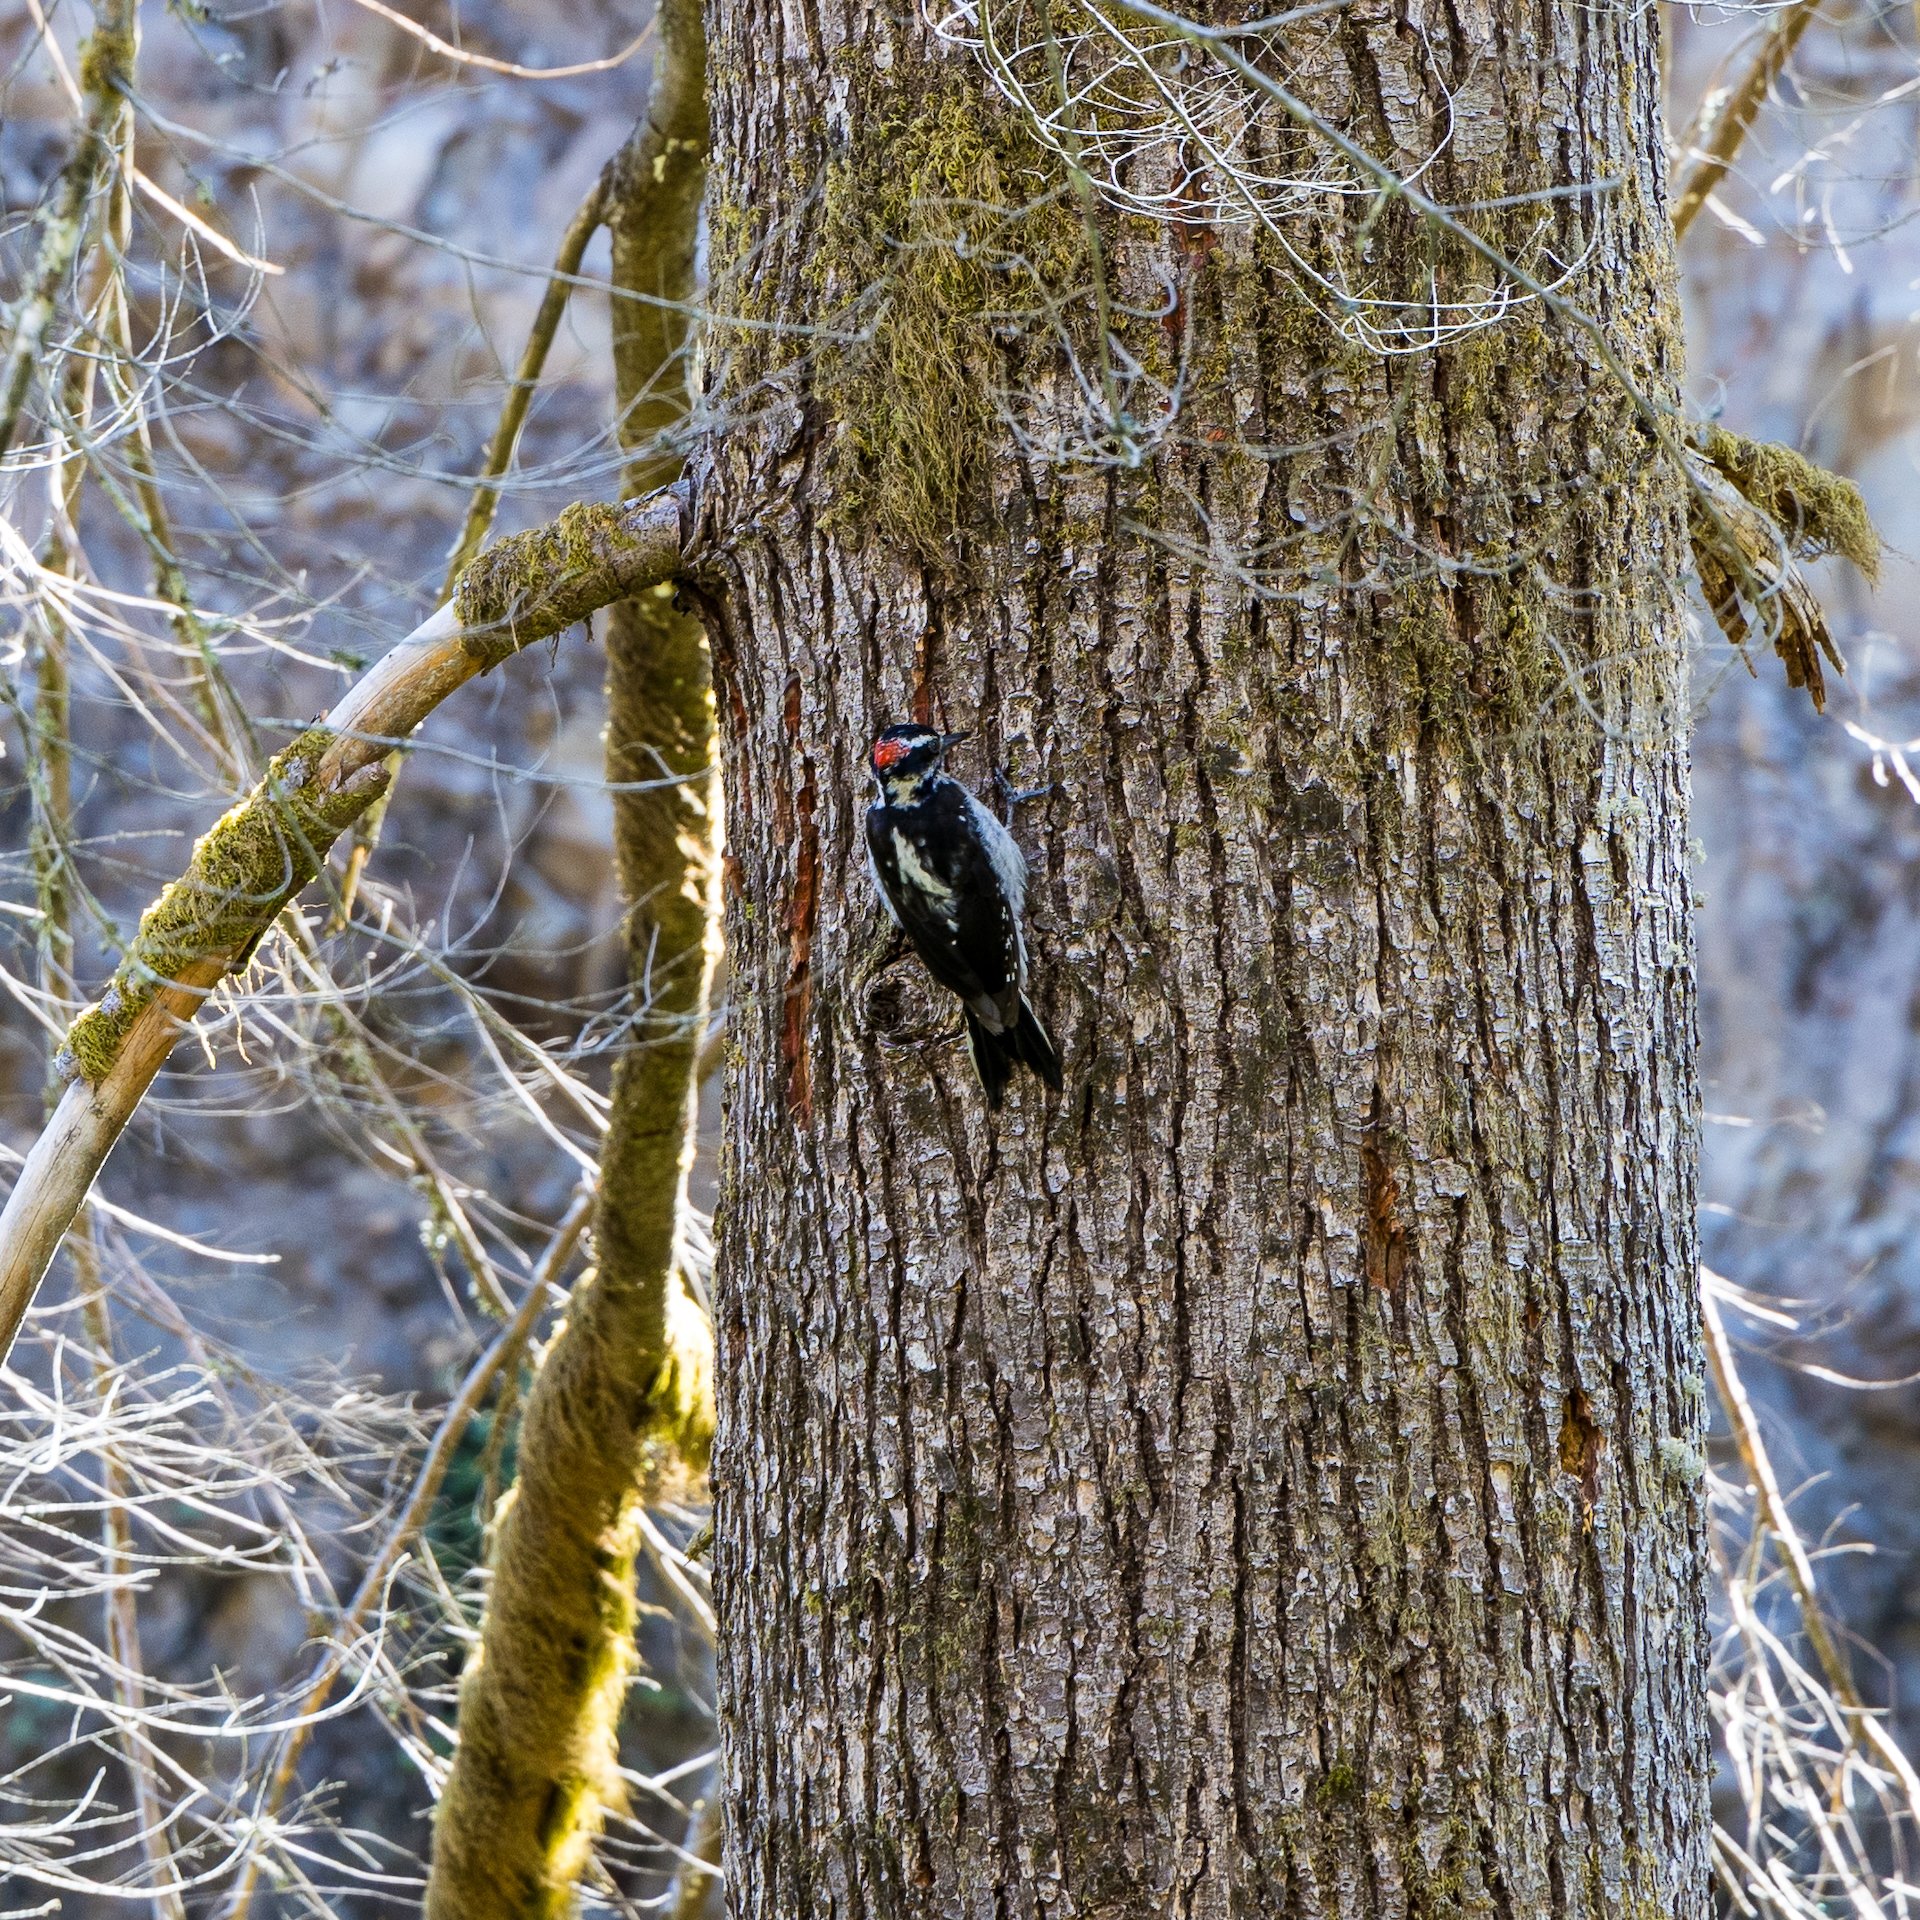  One of the few moments of wildlife - a Downy Woodpecker exploring the dead trees. 